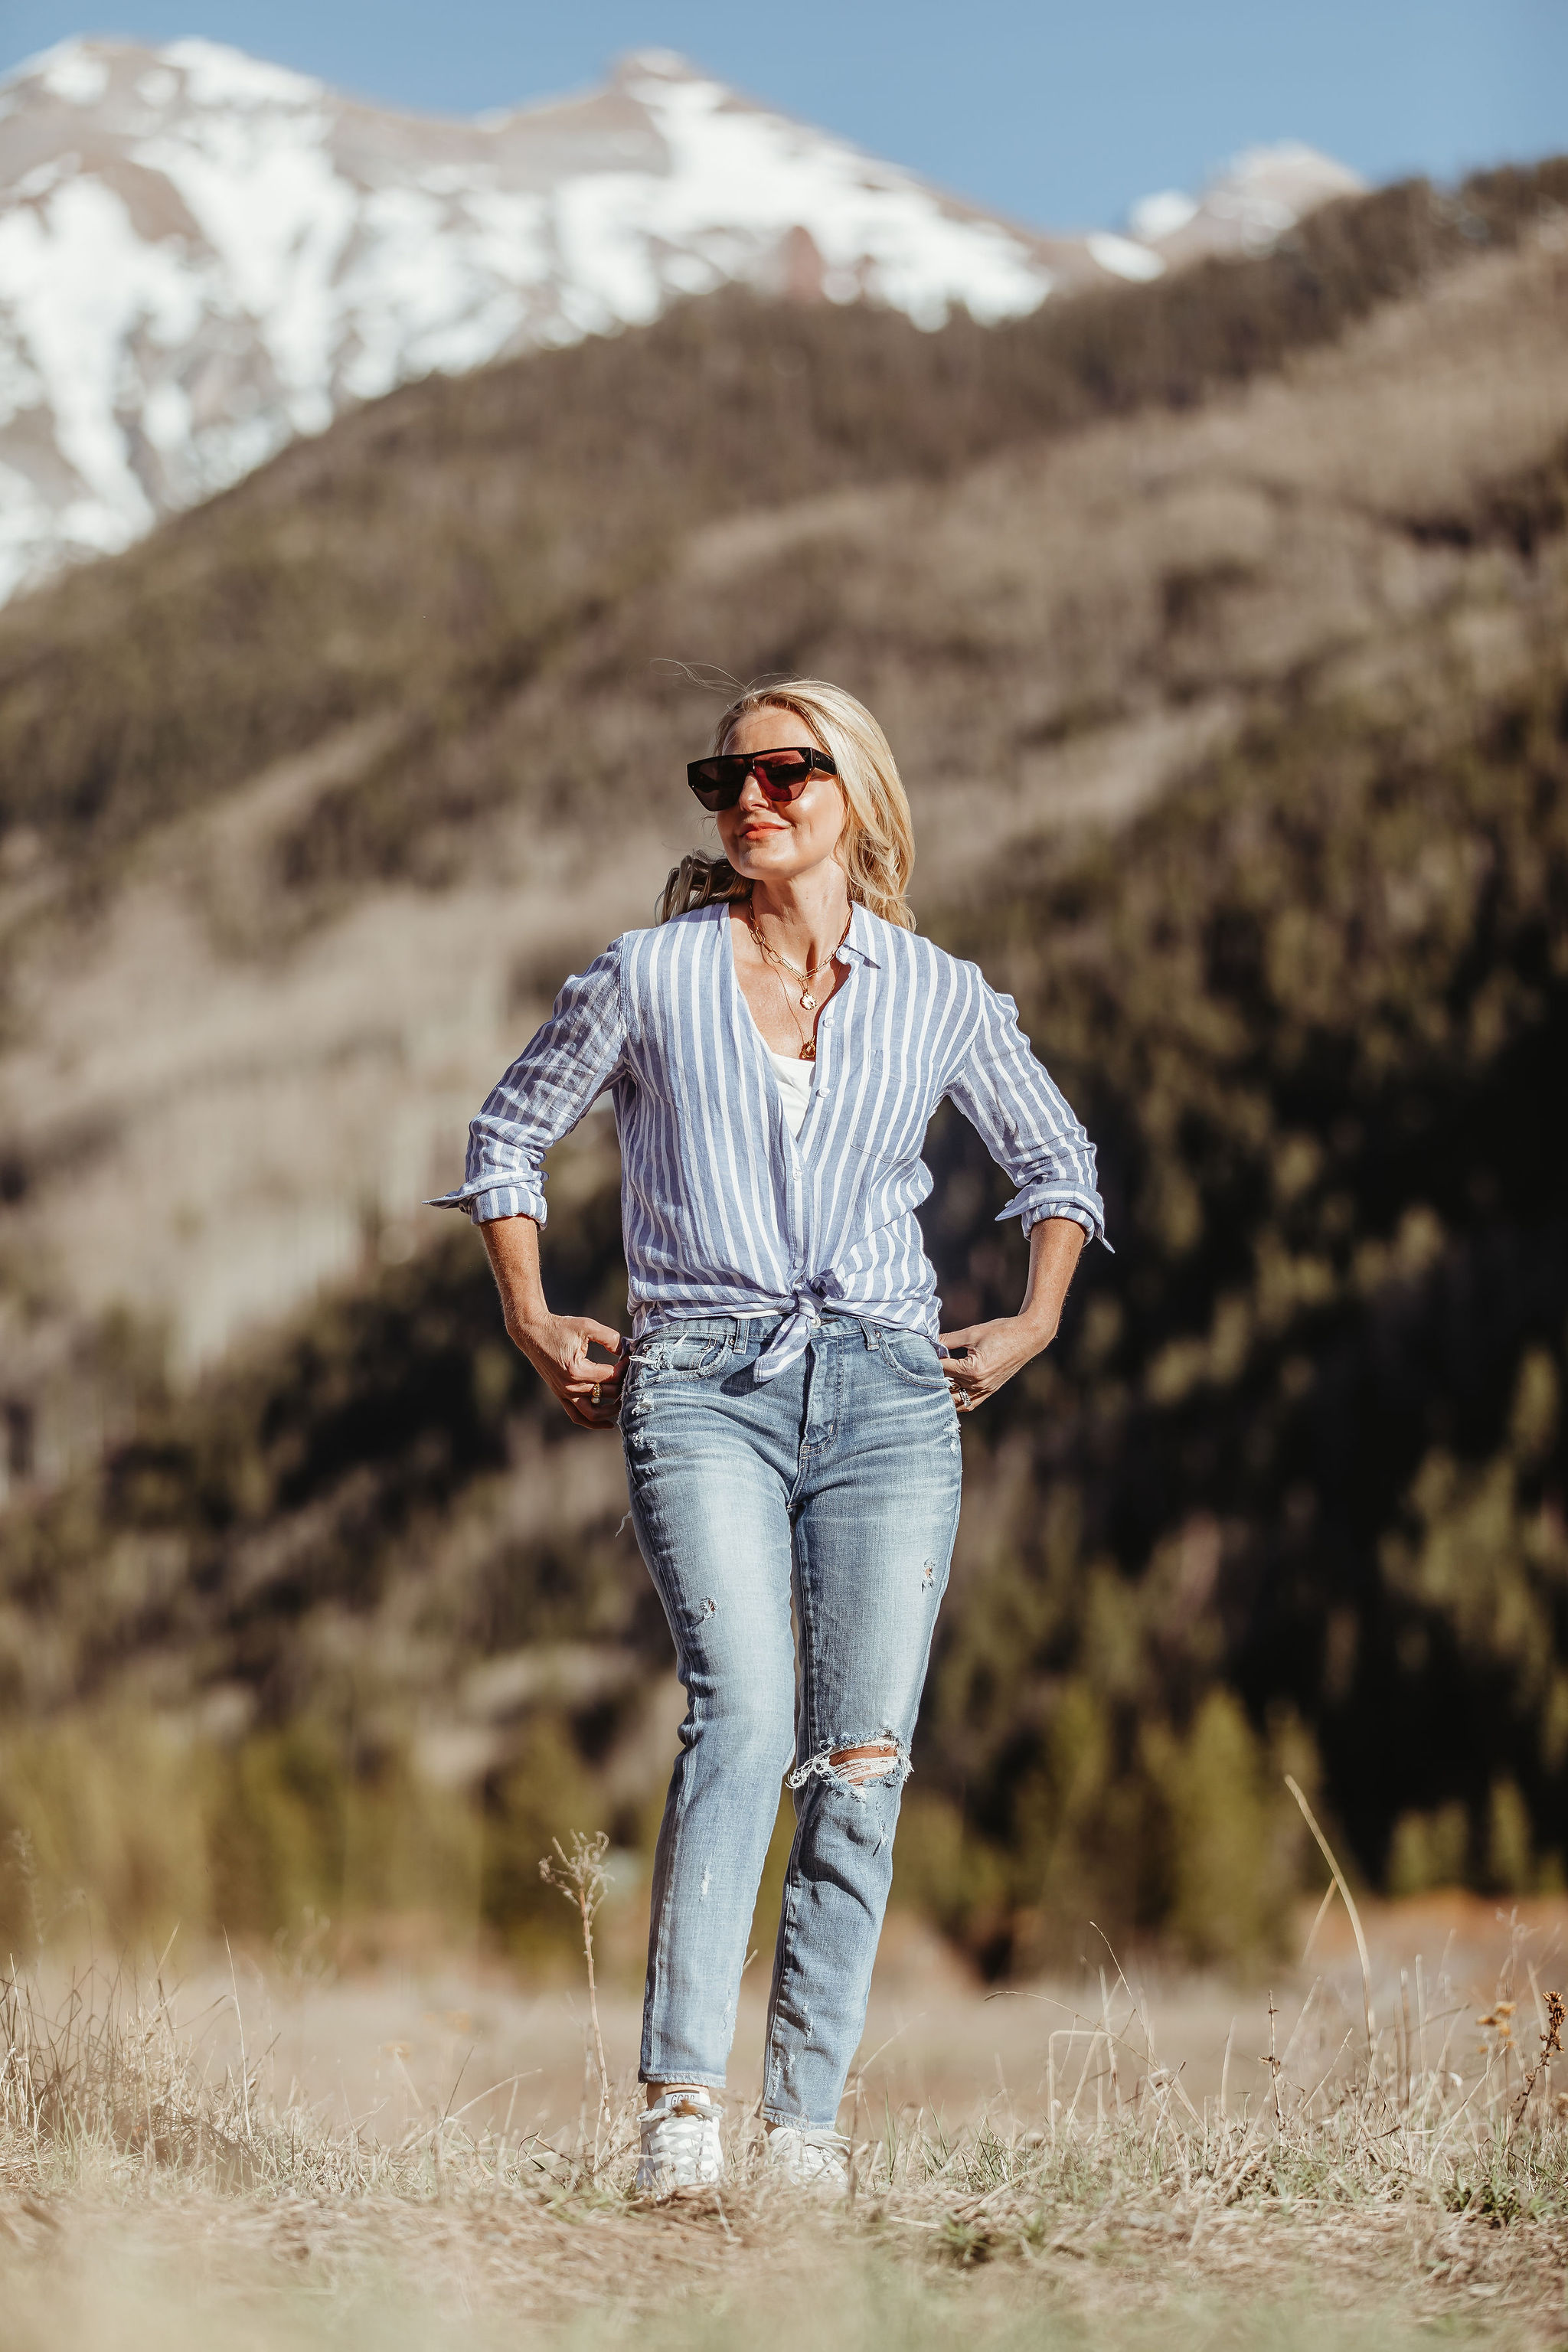 Lightweight Shirts For Summer, Fashion blogger Erin Busbee of BusbeeStyle.com wearing the striped Rails linen button down with Moussy Vintage tapered jeans and Golden Goose platform sneakers with white raw edge sleeveless undershirt from Nordstrom in Telluride, Colorado